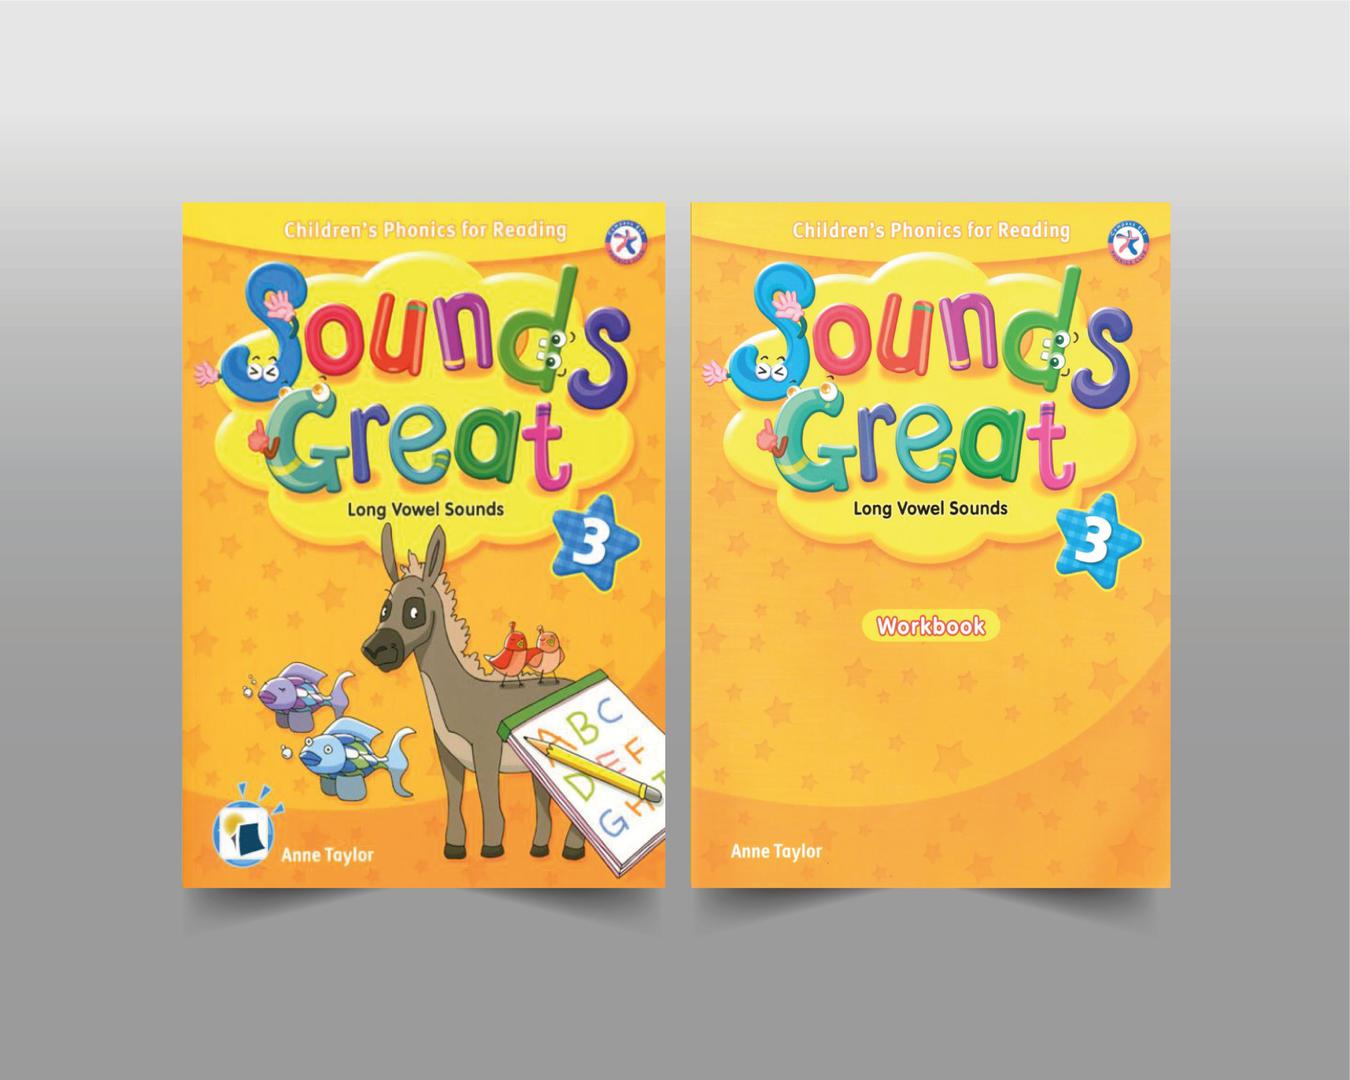 Great　Sounds　Student　book　Workbook　Flash　cards